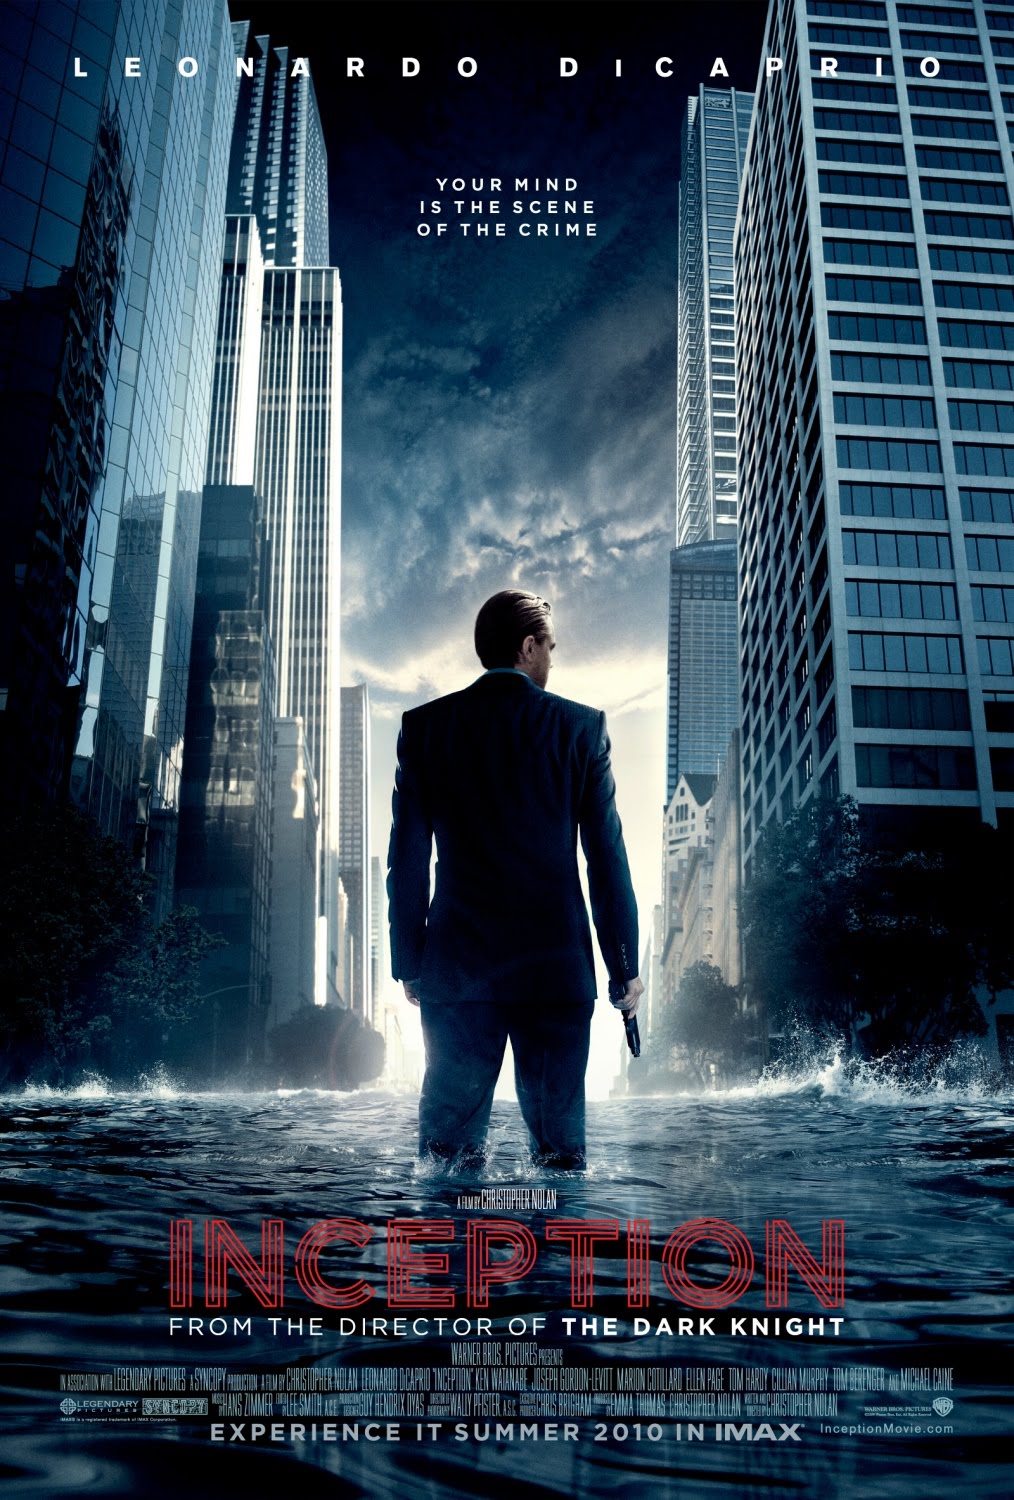 Paul Johnsons A2 Blog: Analysis of Inception: Film Posters